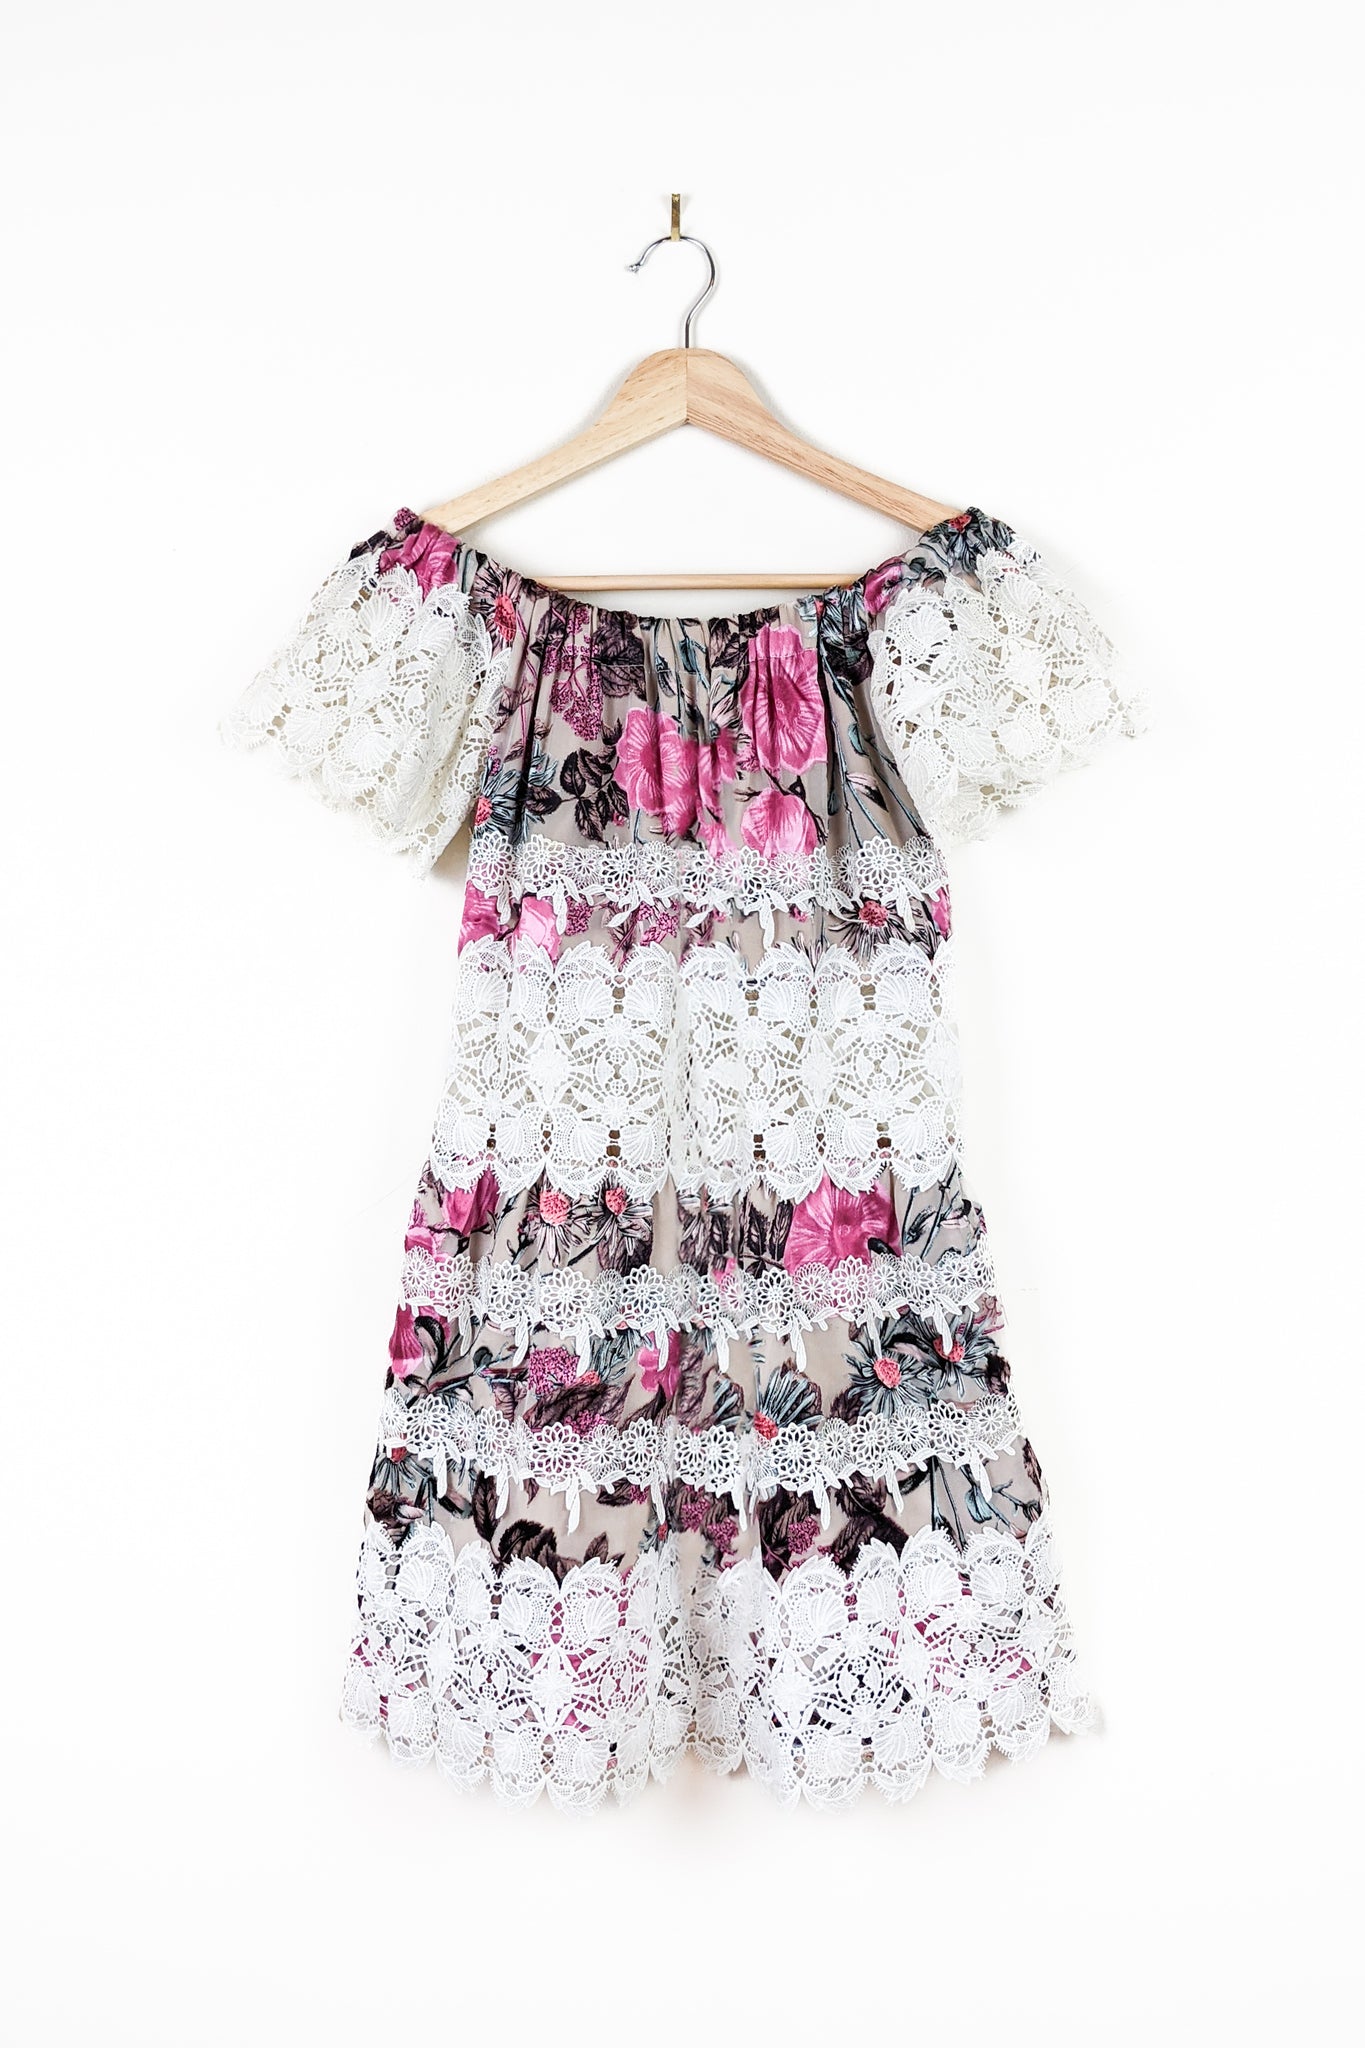 Pre-Loved Cadence Floral Lace Mini Dress